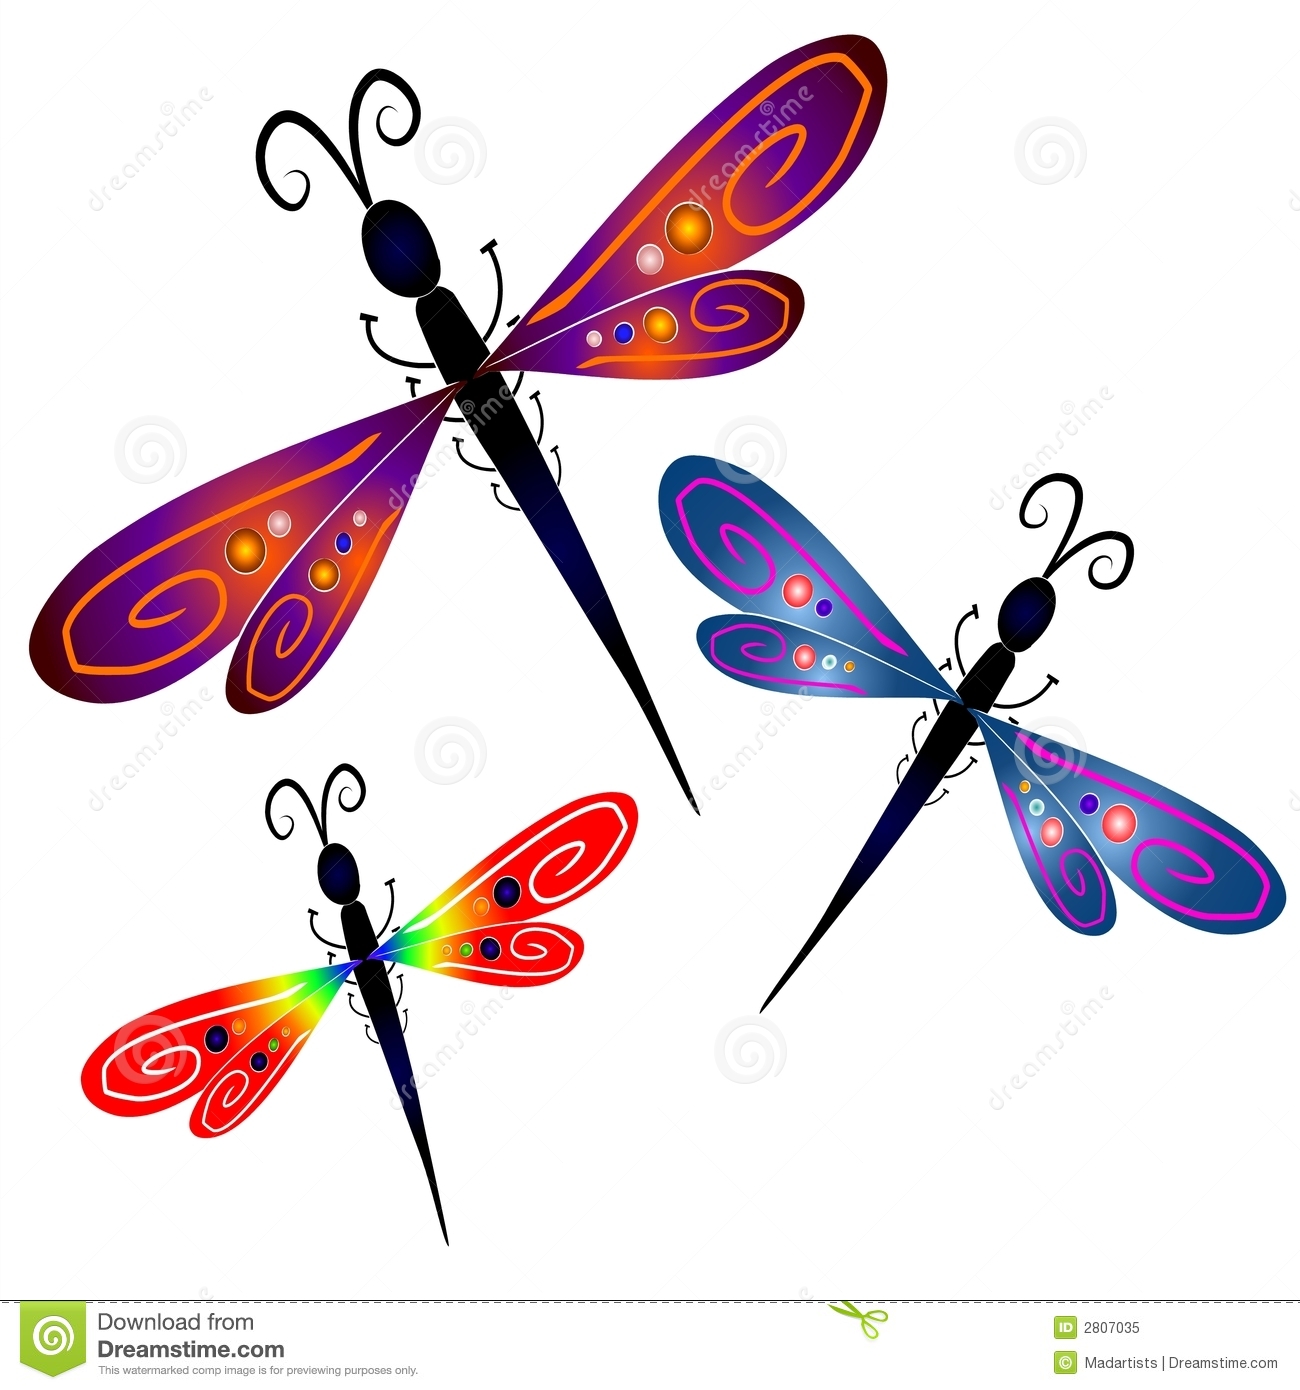 Dragonfly clipart #10, Download drawings